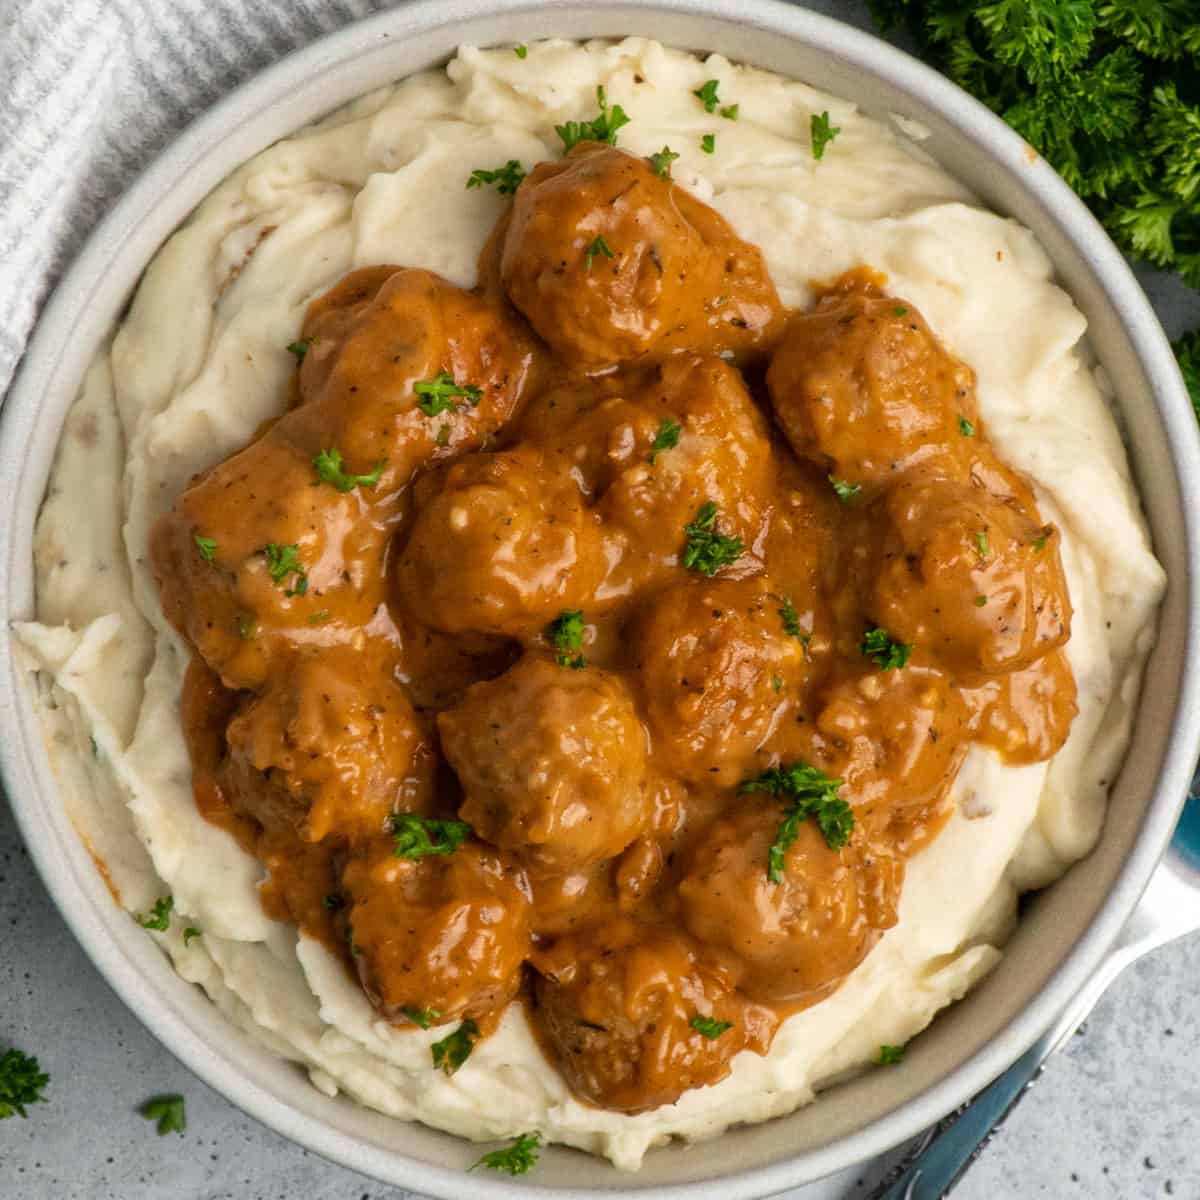 Meatballs and gravy over mashed potatoes.